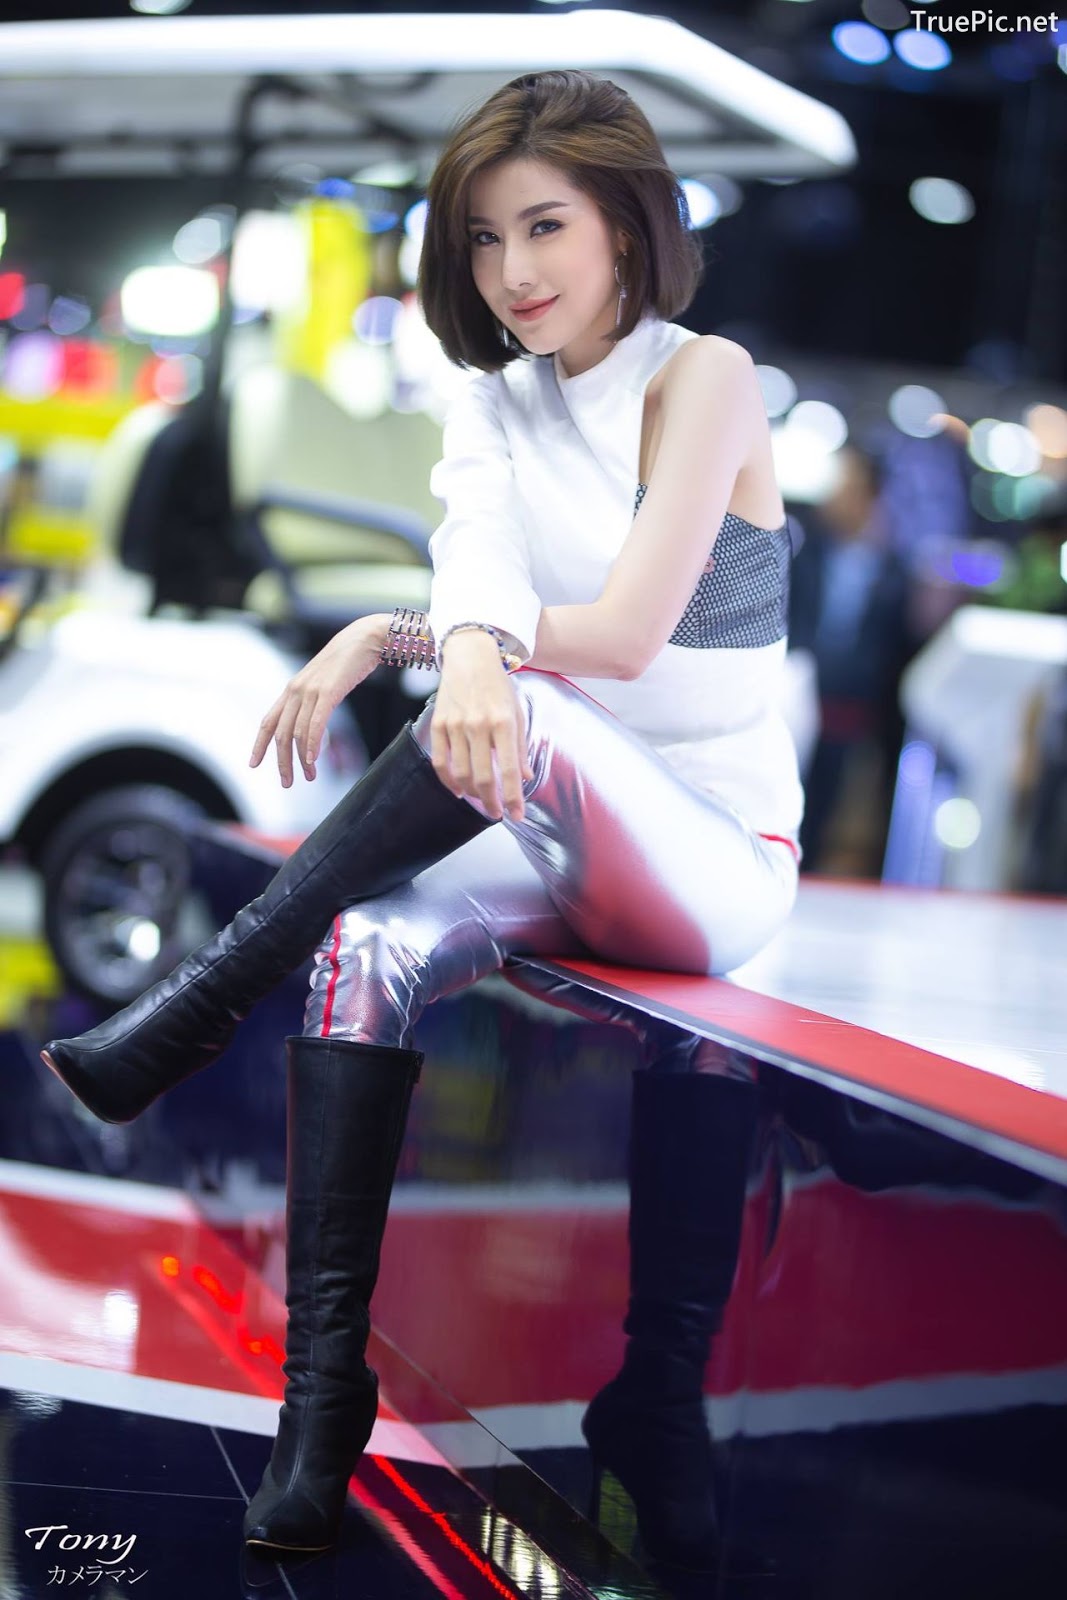 Image-Thailand-Hot-Model-Thai-Racing-Girl-At-Motor-Expo-2018-TruePic.net- Picture-101